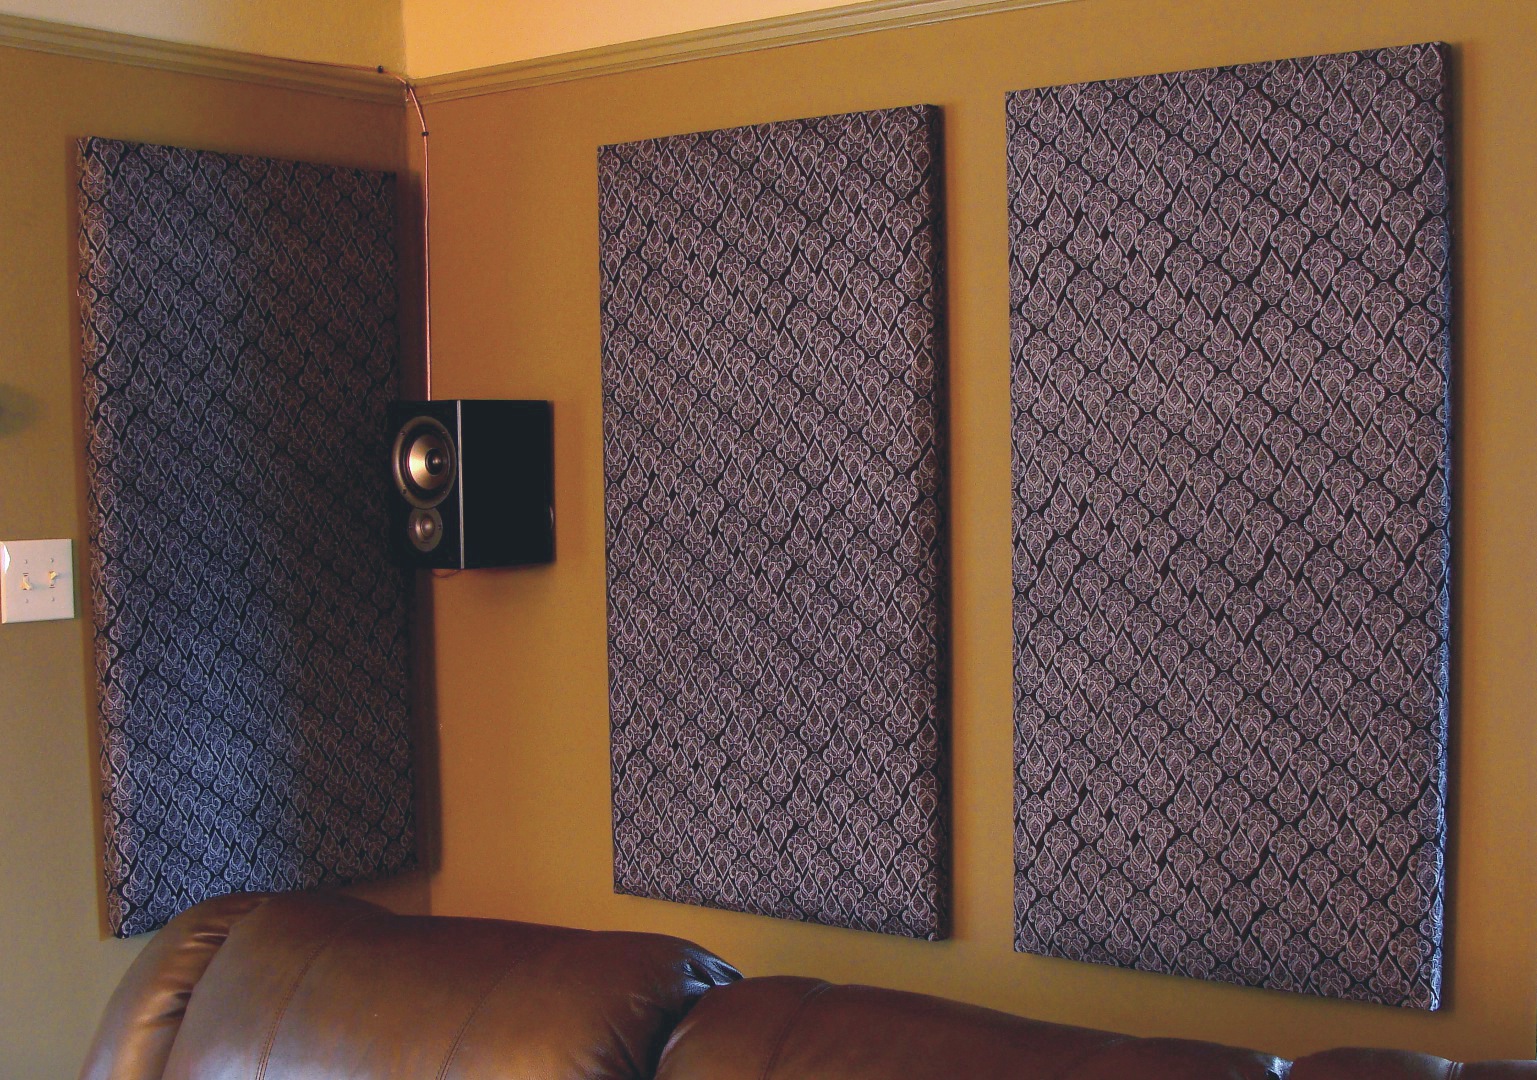 How to Build Your Own Acoustic Panels (DIY)